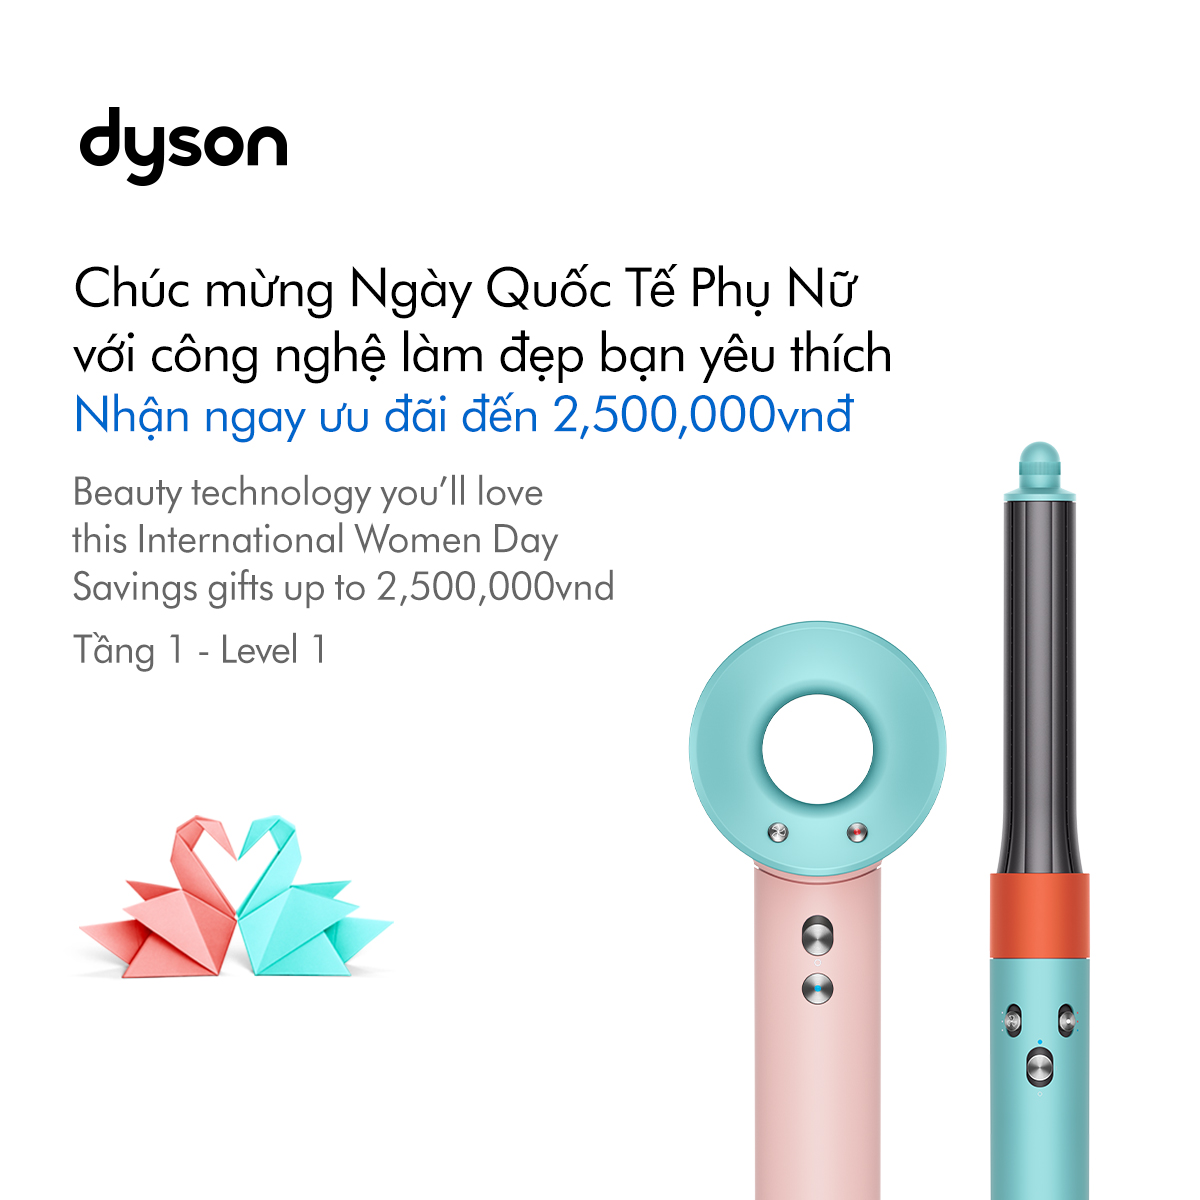 🎉DYSON SENDS THOUSANDS OF LOVE - SAVING GIFTS UP TO 2,500,000 VND🎉